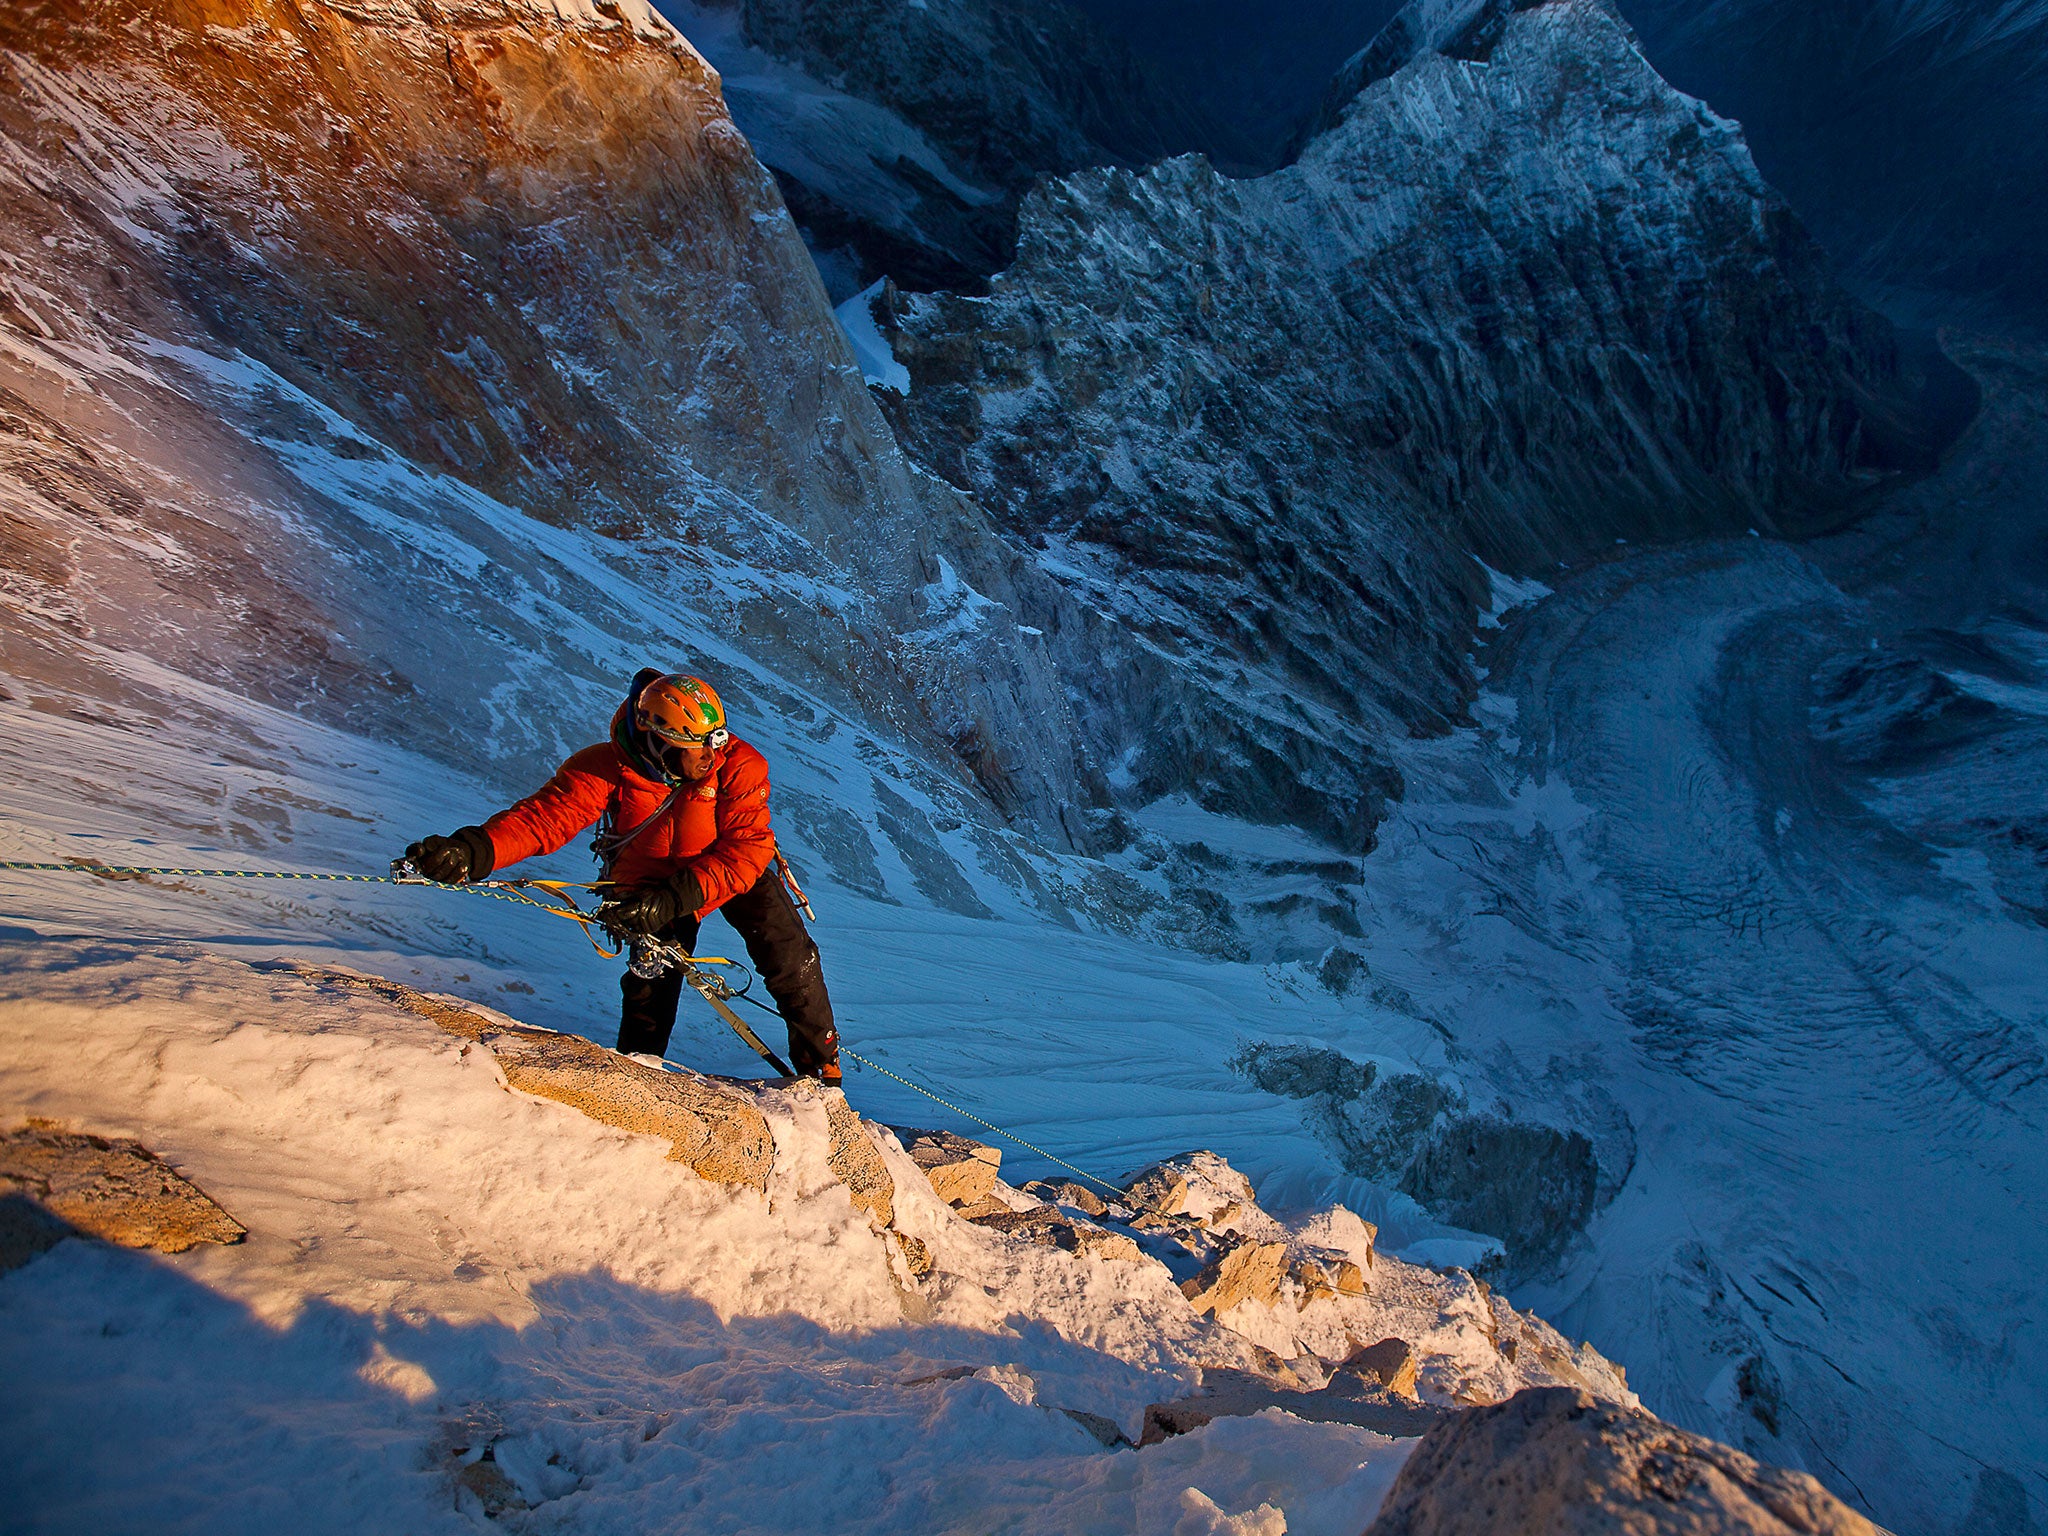 Jimmy Chin at first light on the 11th day of climbing, the day of the push for the summit